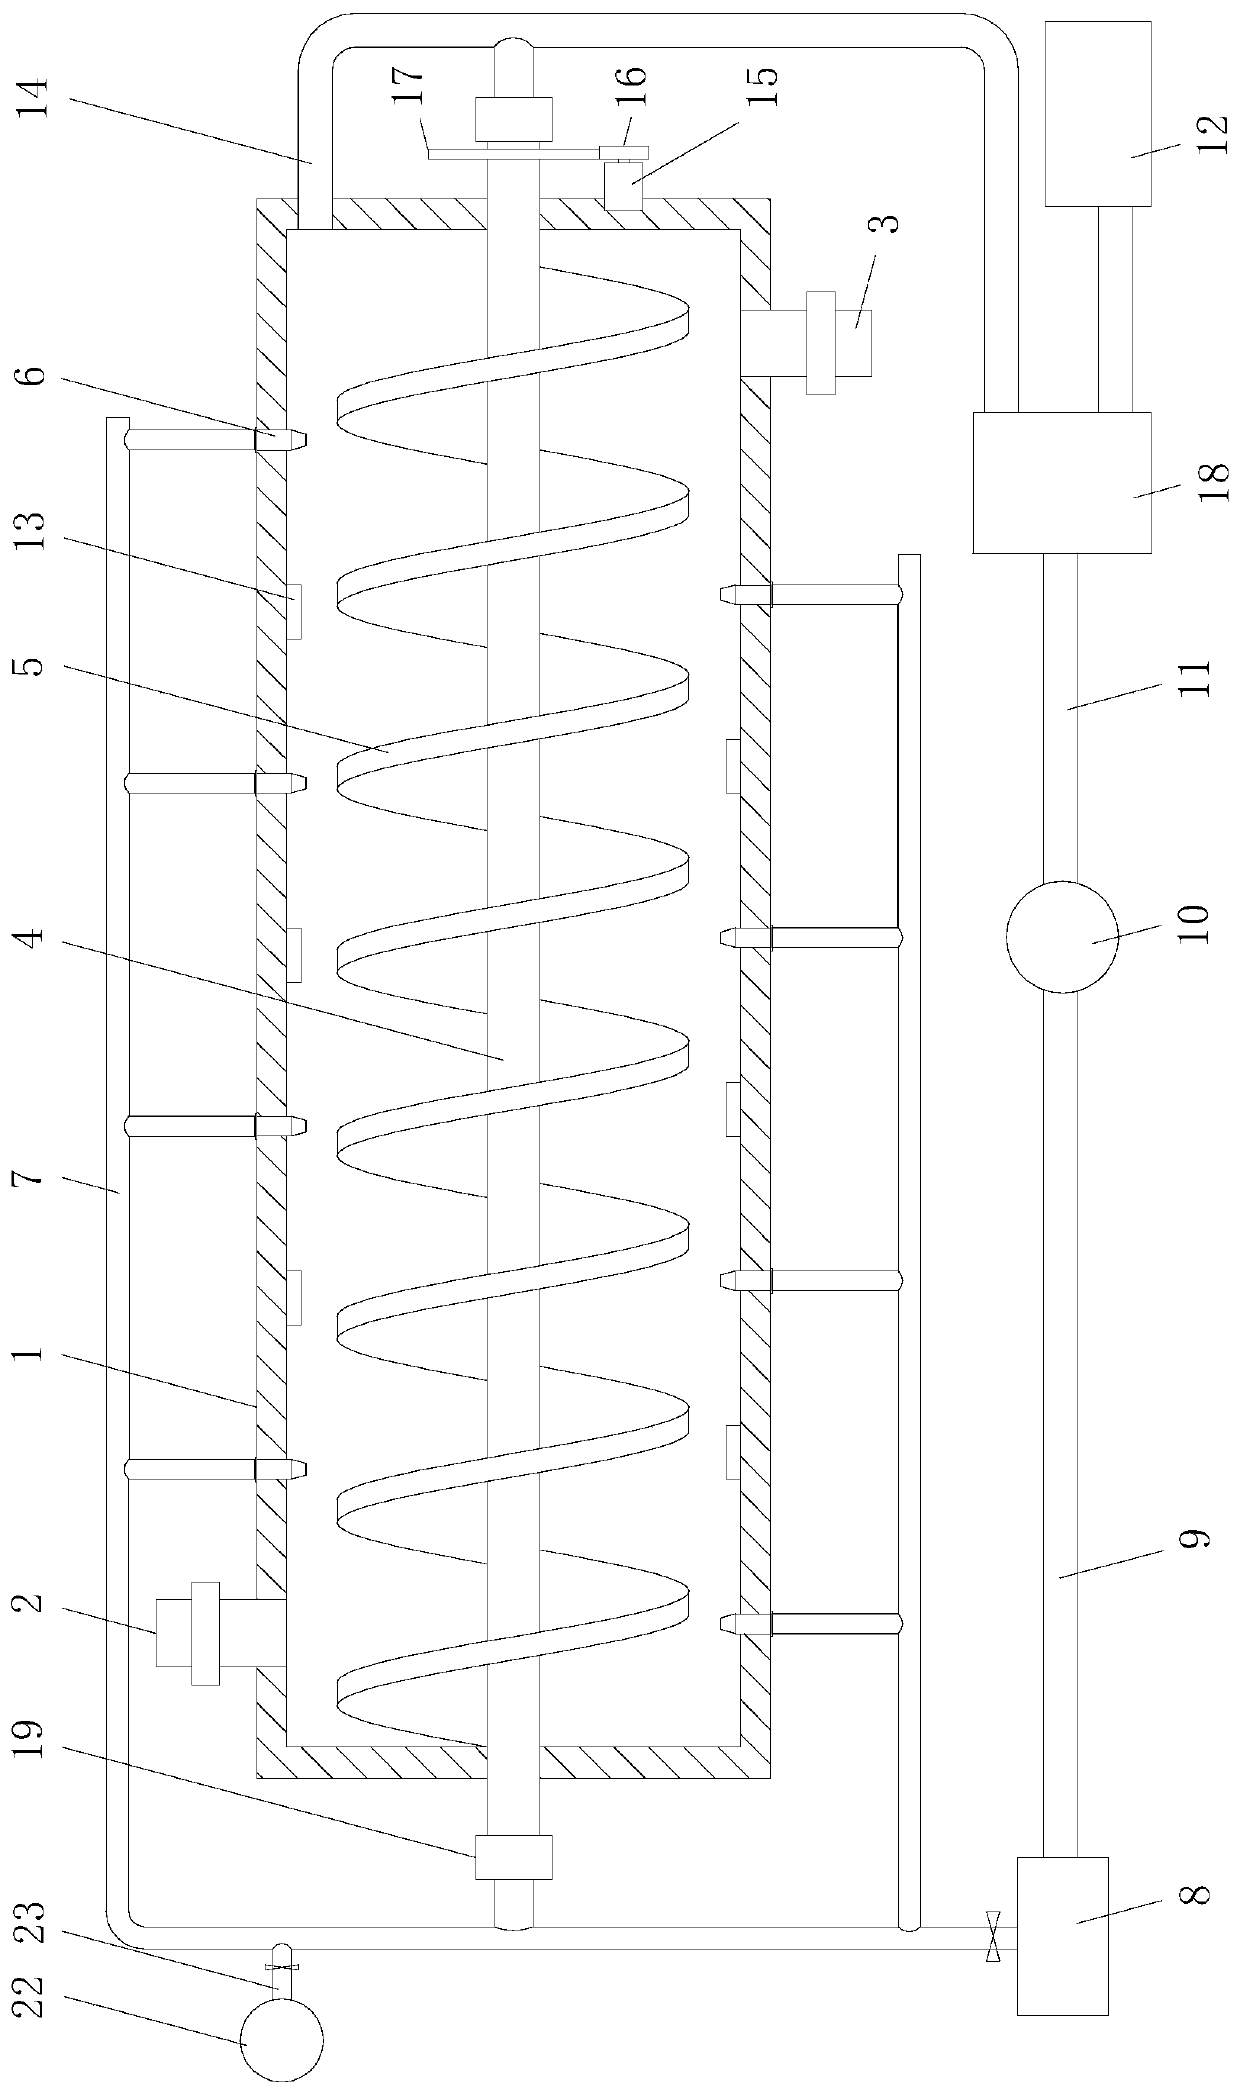 Drying and sterilizing apparatus for dehydrated vegetable processing use, and drying and sterilizing method of dehydrated vegetables